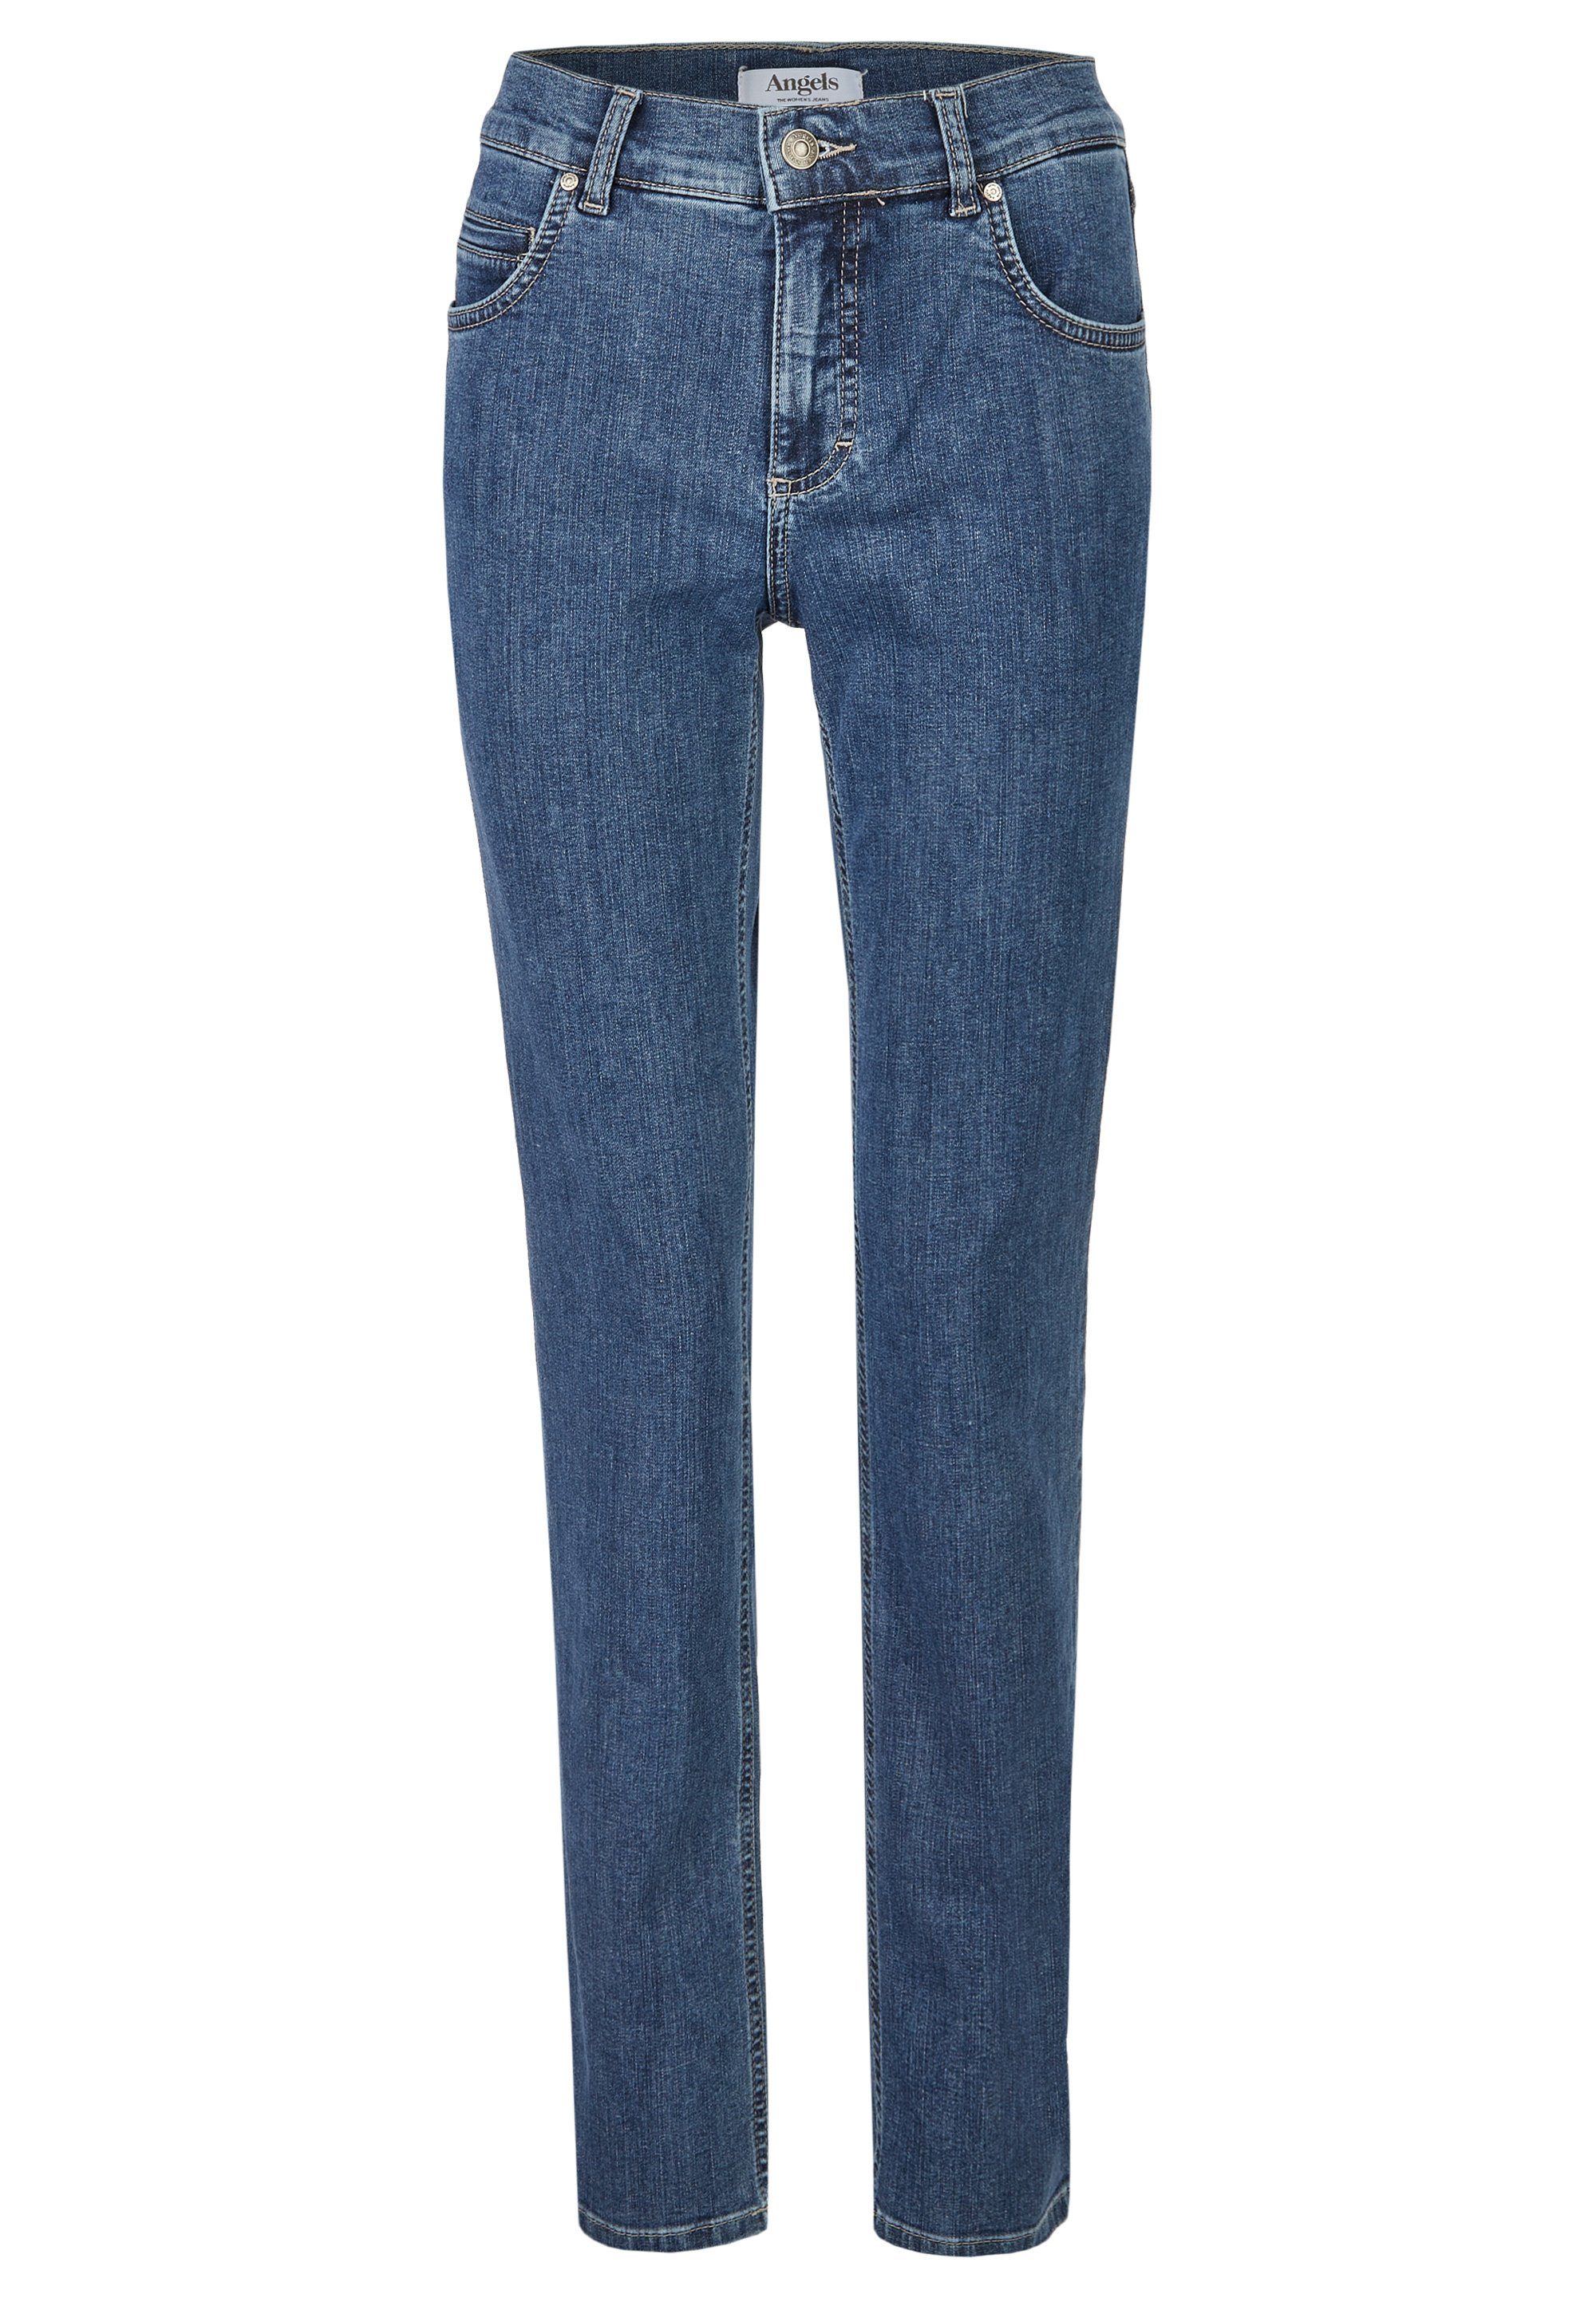 ANGELS Stretch-Jeans ANGELS JEANS CICI mid blue 346 3400.33 - STRETCH | Stretchjeans